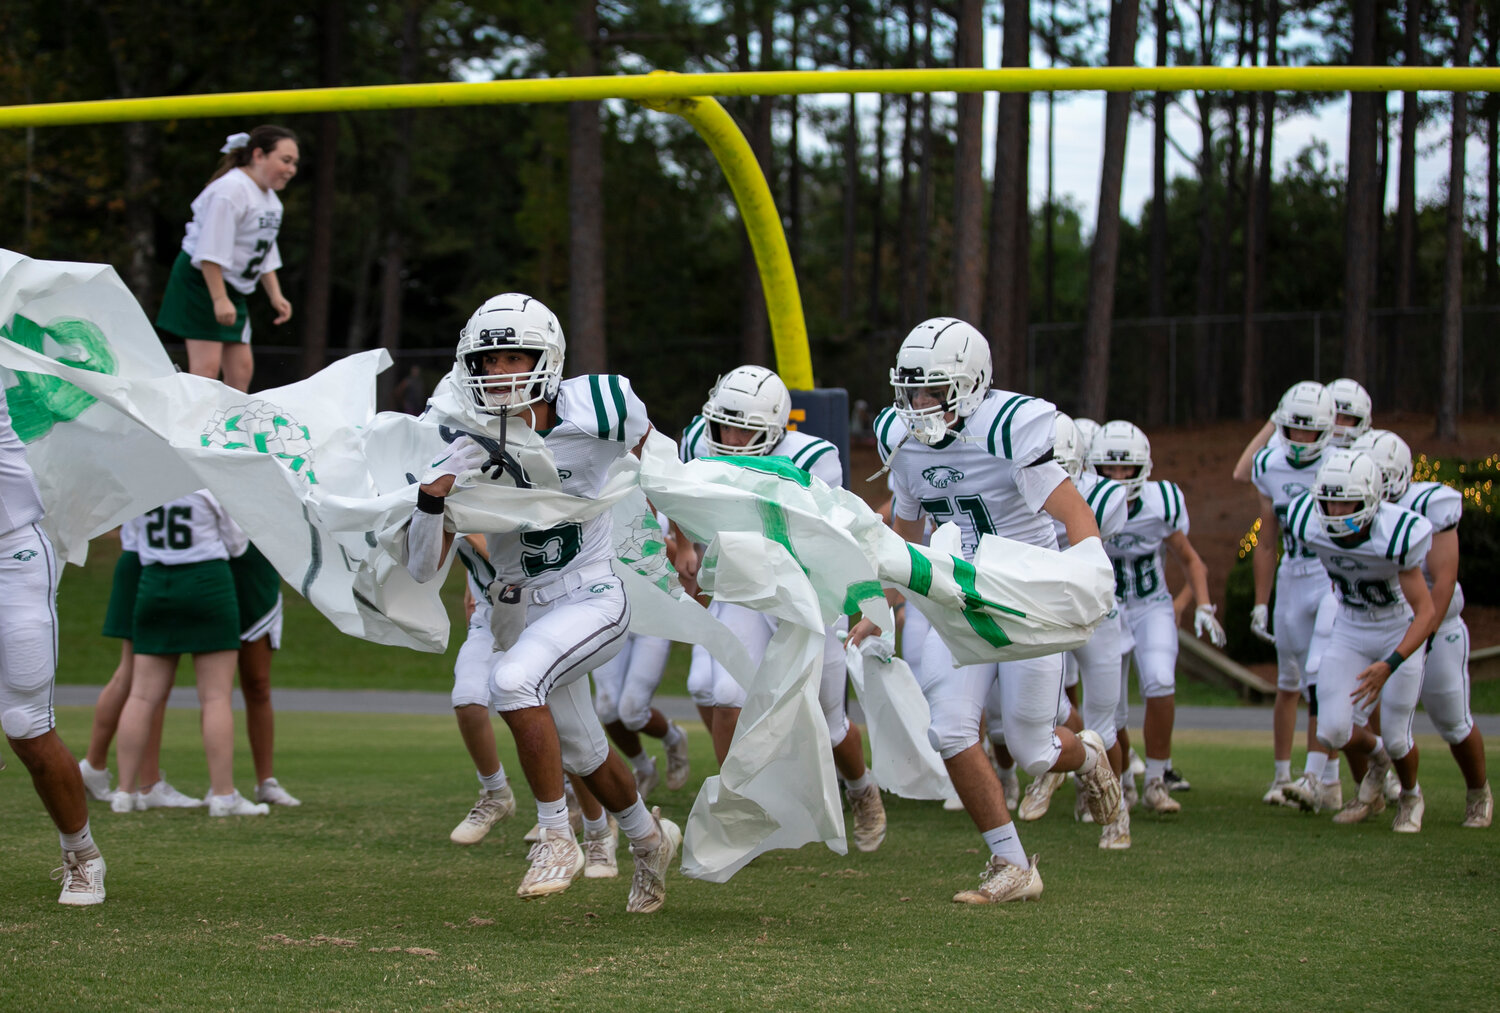 The Bayshore Christian Eagles break through the banner on W.C. Majors Field at Fairhope Municipal Stadium for JV action against the St. Michael Catholic Cardinals on Monday, Sept. 25. It was the team’s first game in its hometown of Fairhope although Bayshore Christian served as the away team.